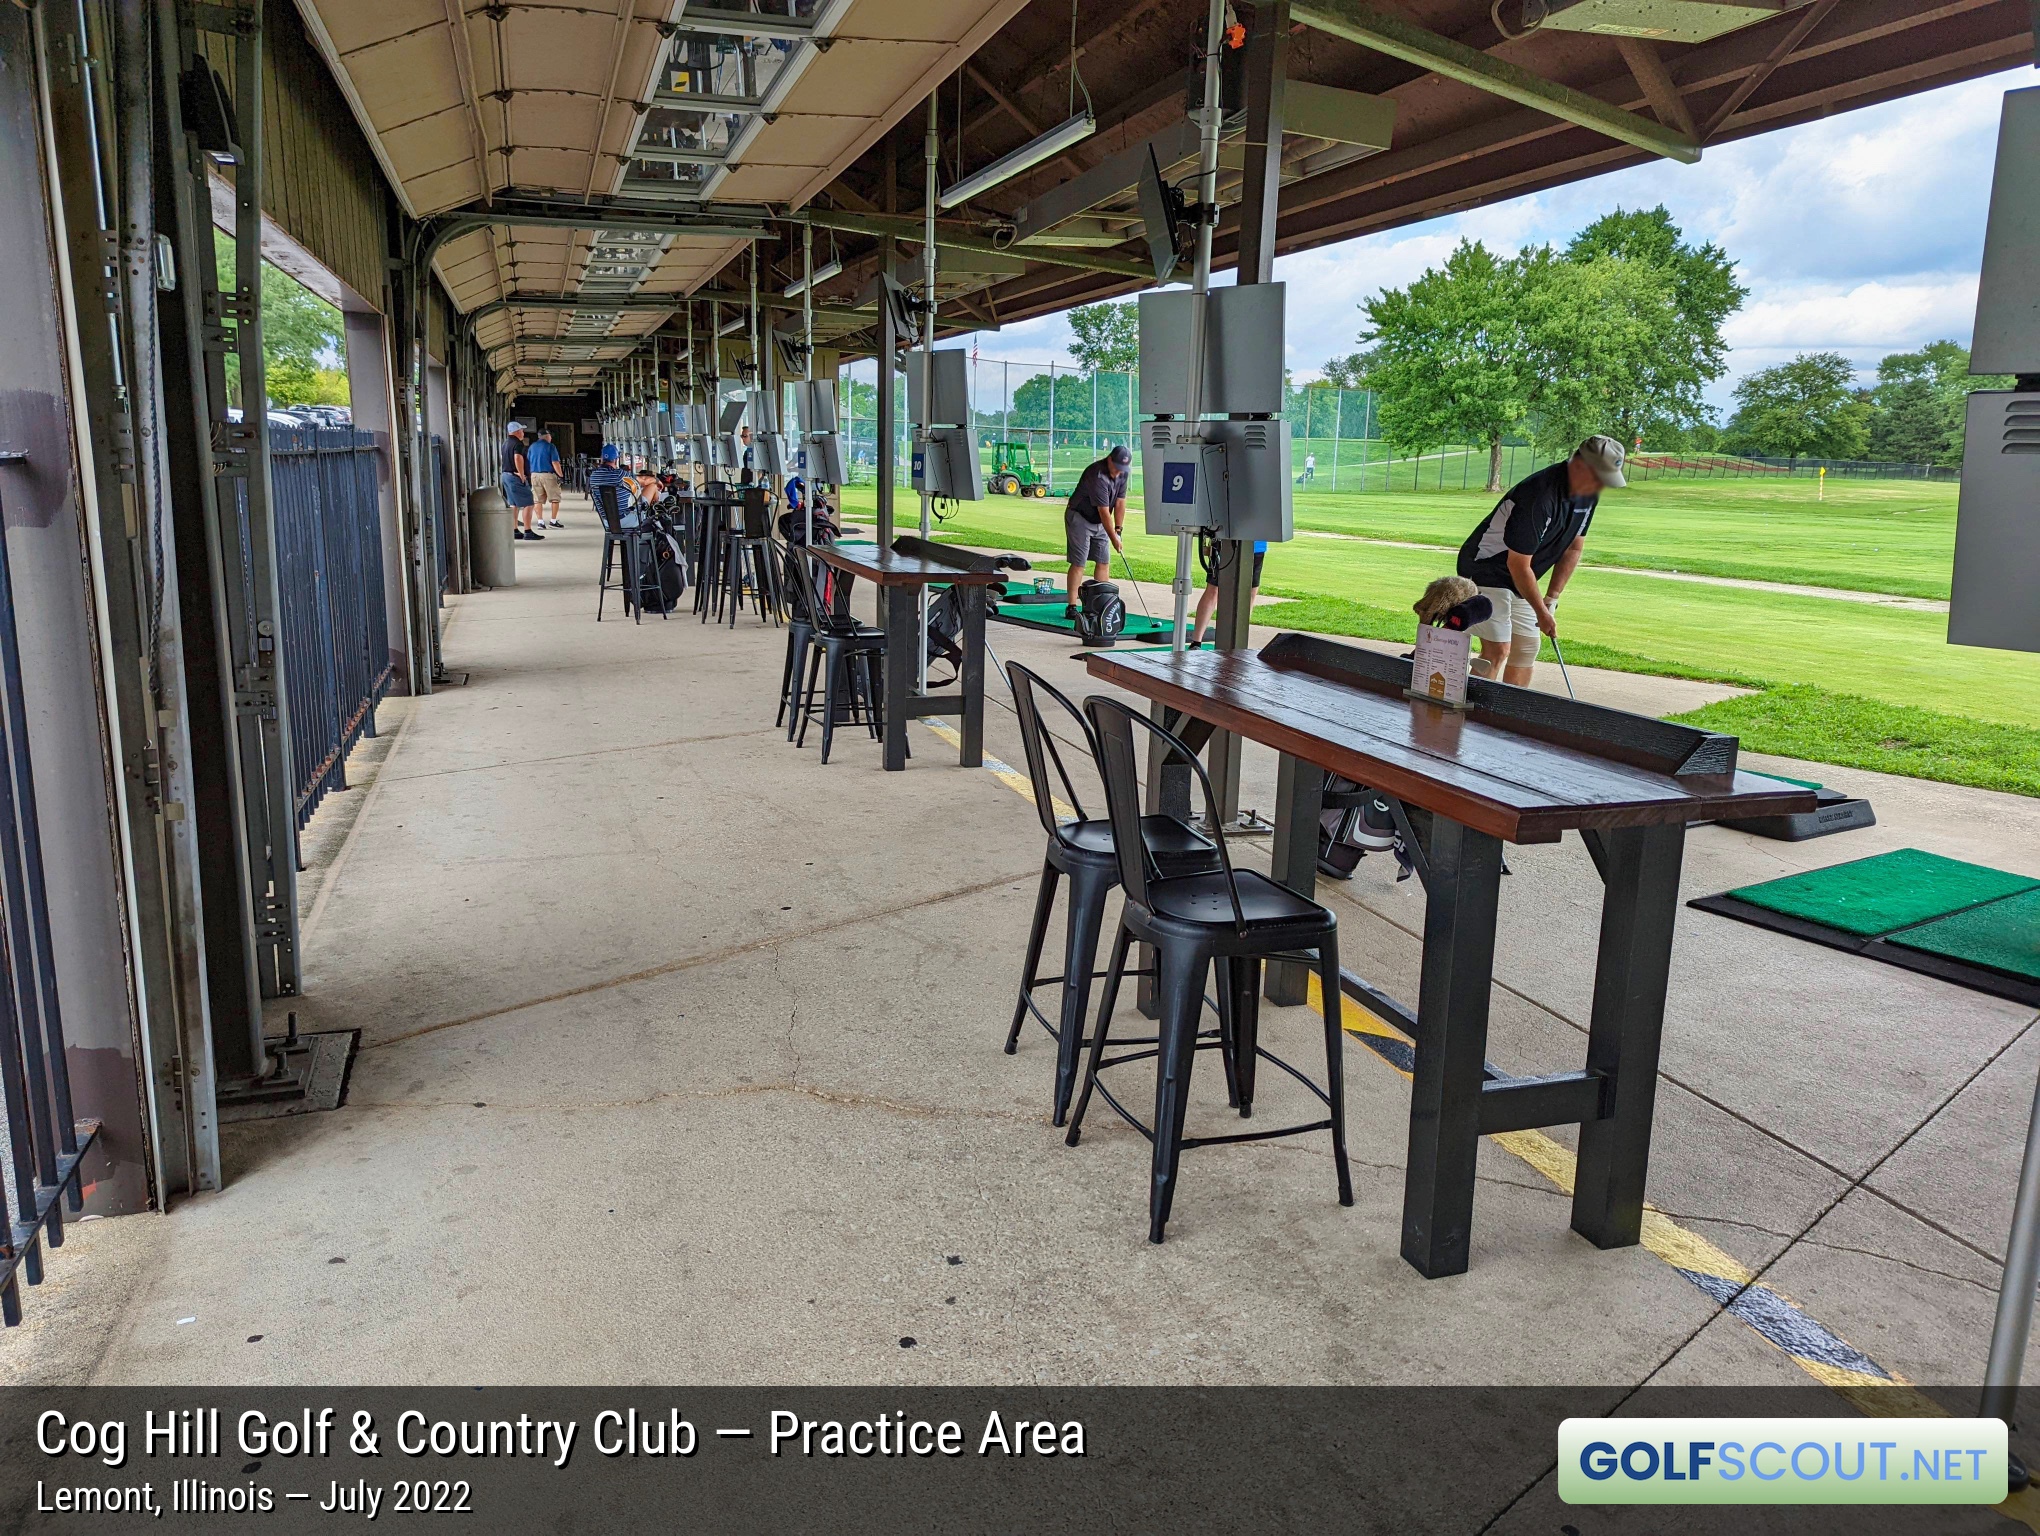 Photo of the practice area at Cog Hill Course #4 - Dubsdread in Lemont, Illinois. Dozens of hitting bays, at two different angles to the range. Everything is on one level -- not multiple floors.